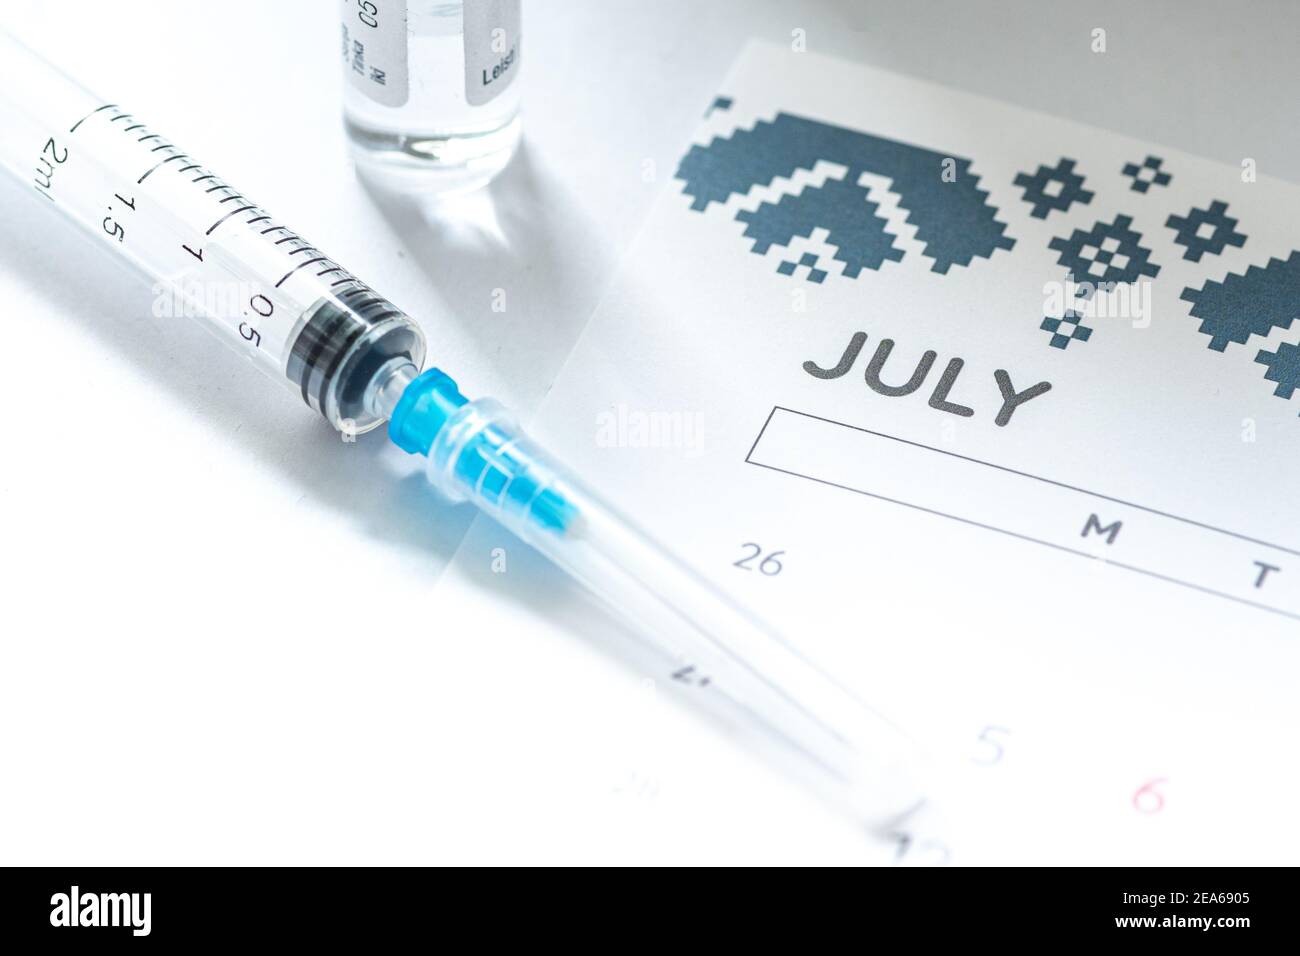 Syringe, glass vial or phial and calendar with month of July on a white table ready to be used. Covid or Coronavirus vaccine background, close up Stock Photo